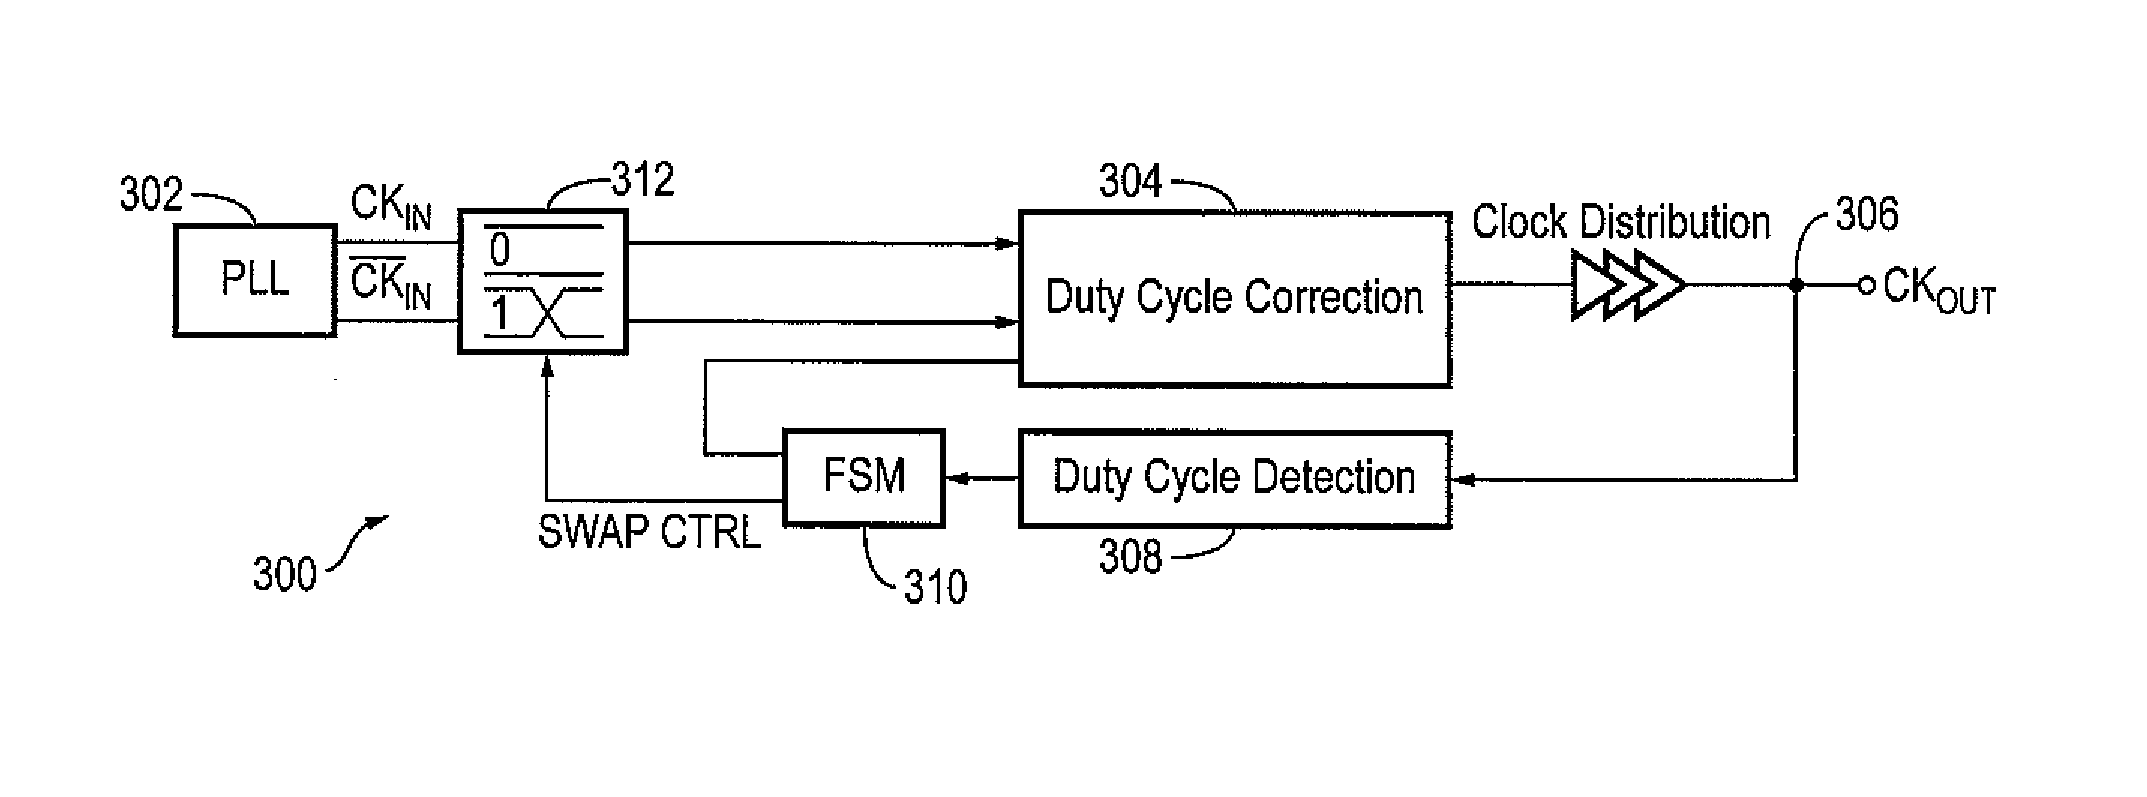 Apparatus and method for offset cancellation in duty cycle corrections